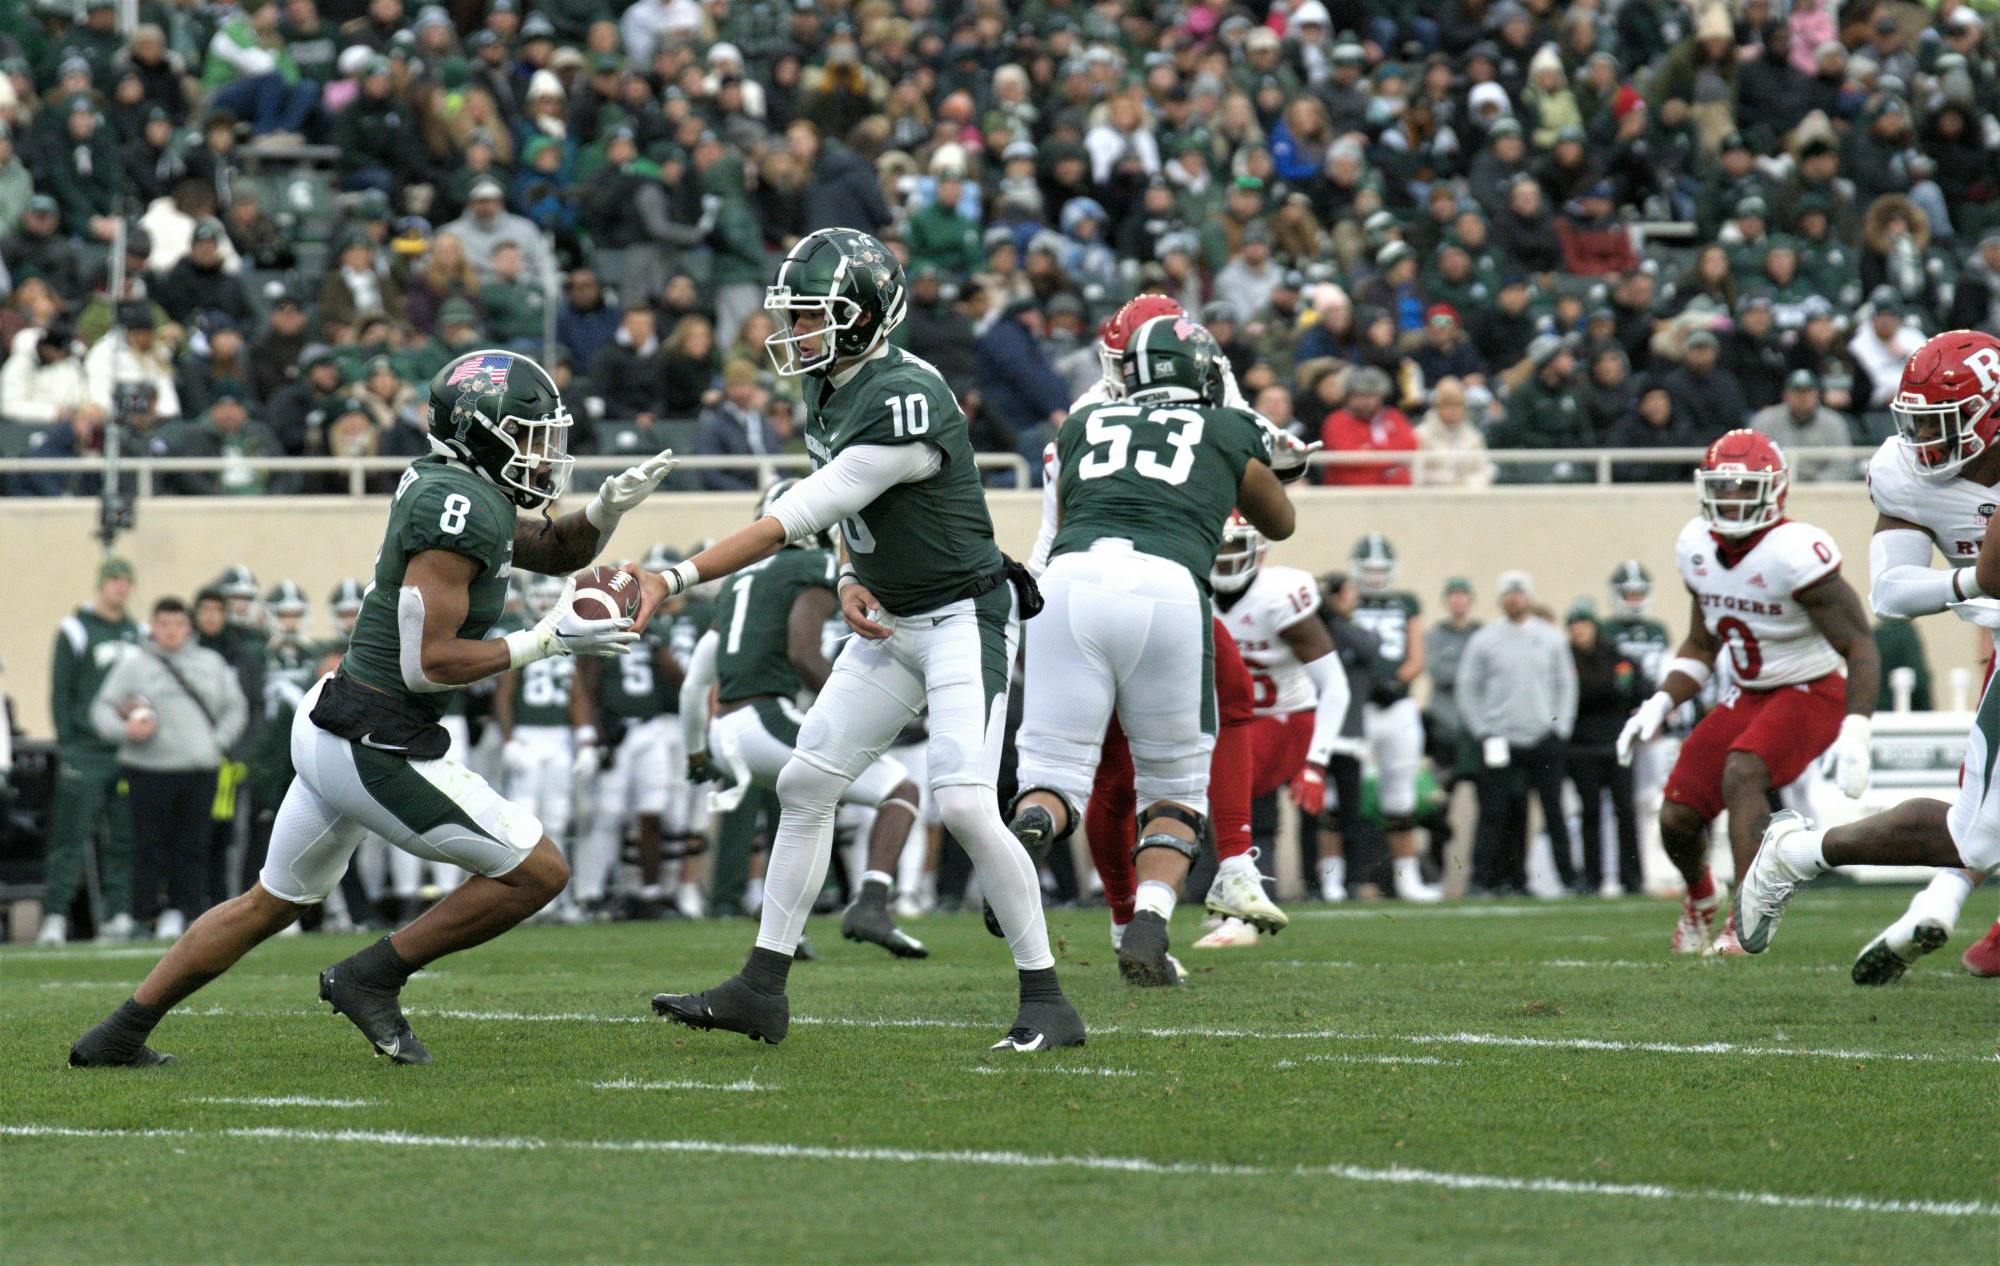 <p>Quarterback #10 Payton Thorne hands off the ball to #8 Jalen Berger ﻿during the matchup against Rutgers on Nov. 12, 2022. </p>